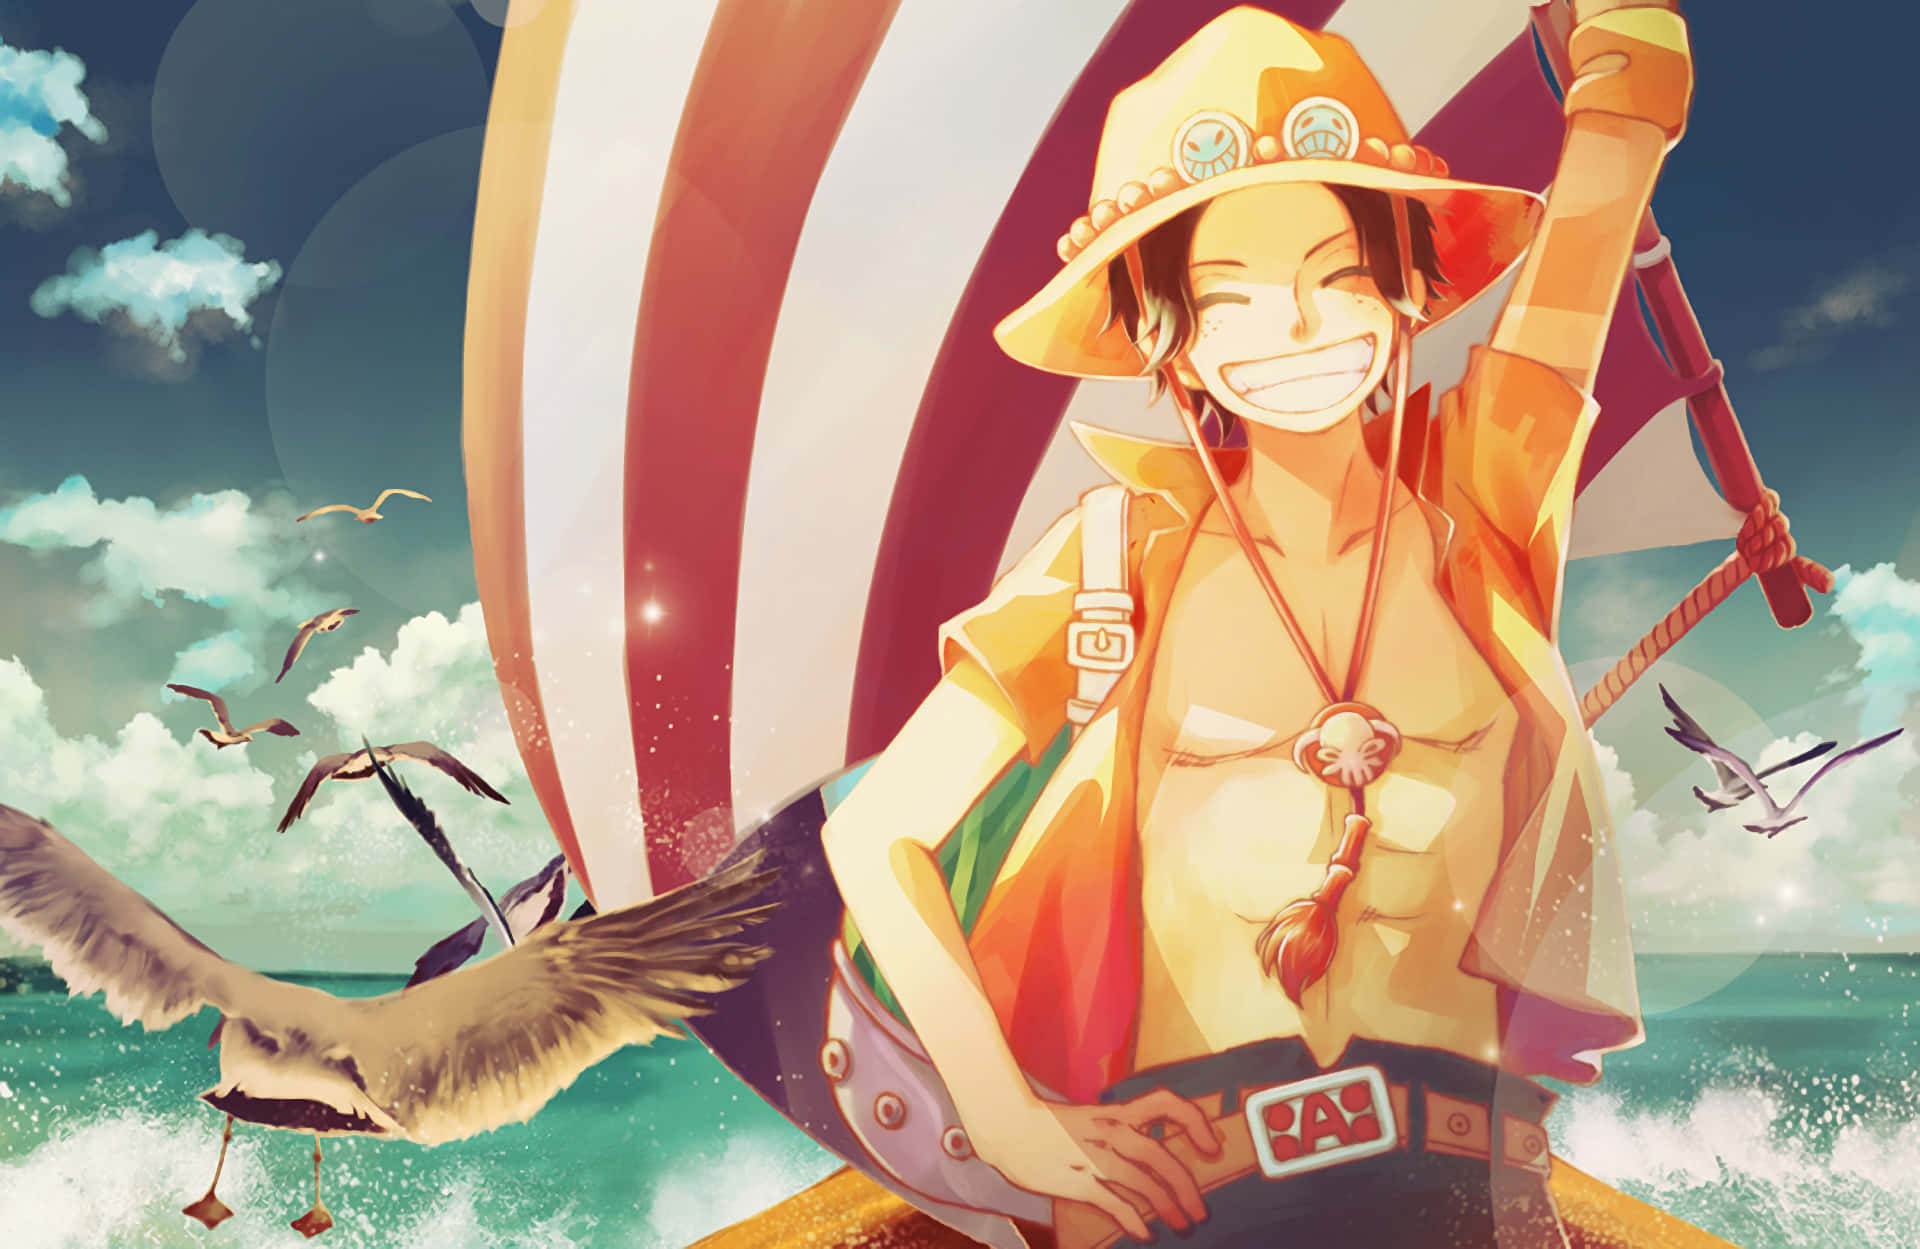 Join The Straw Hat Pirates And Fight Alongside Portgas D Ace! Background